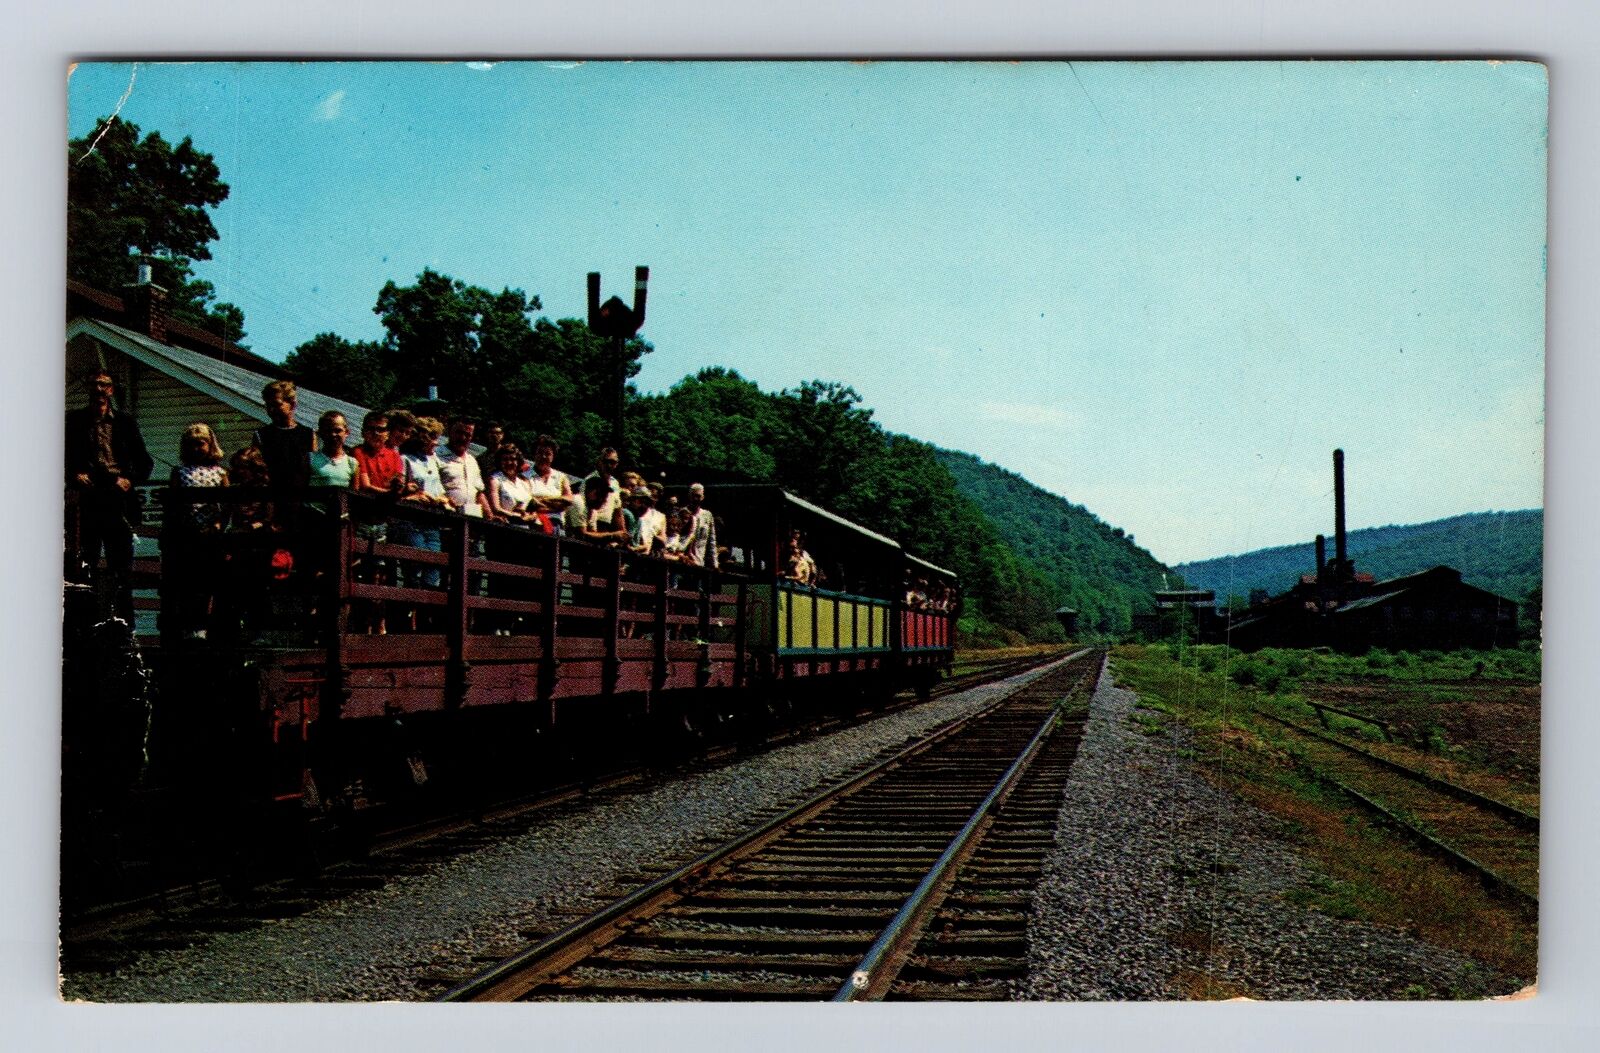 WV-West Virginia, Sightseeing Cars Cass Scenic Railroad, Vintage c1970 Postcard